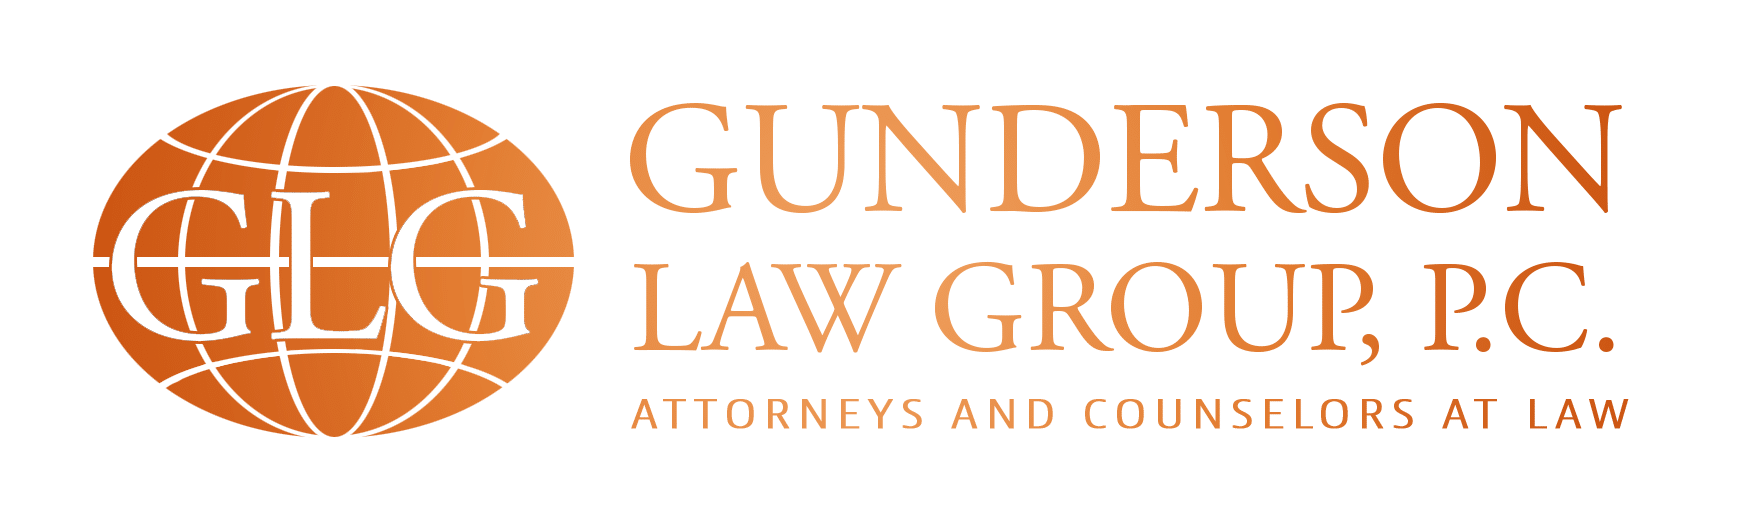 GLG Gunderson Law Group P.C. Attorneys And Counselors At Law